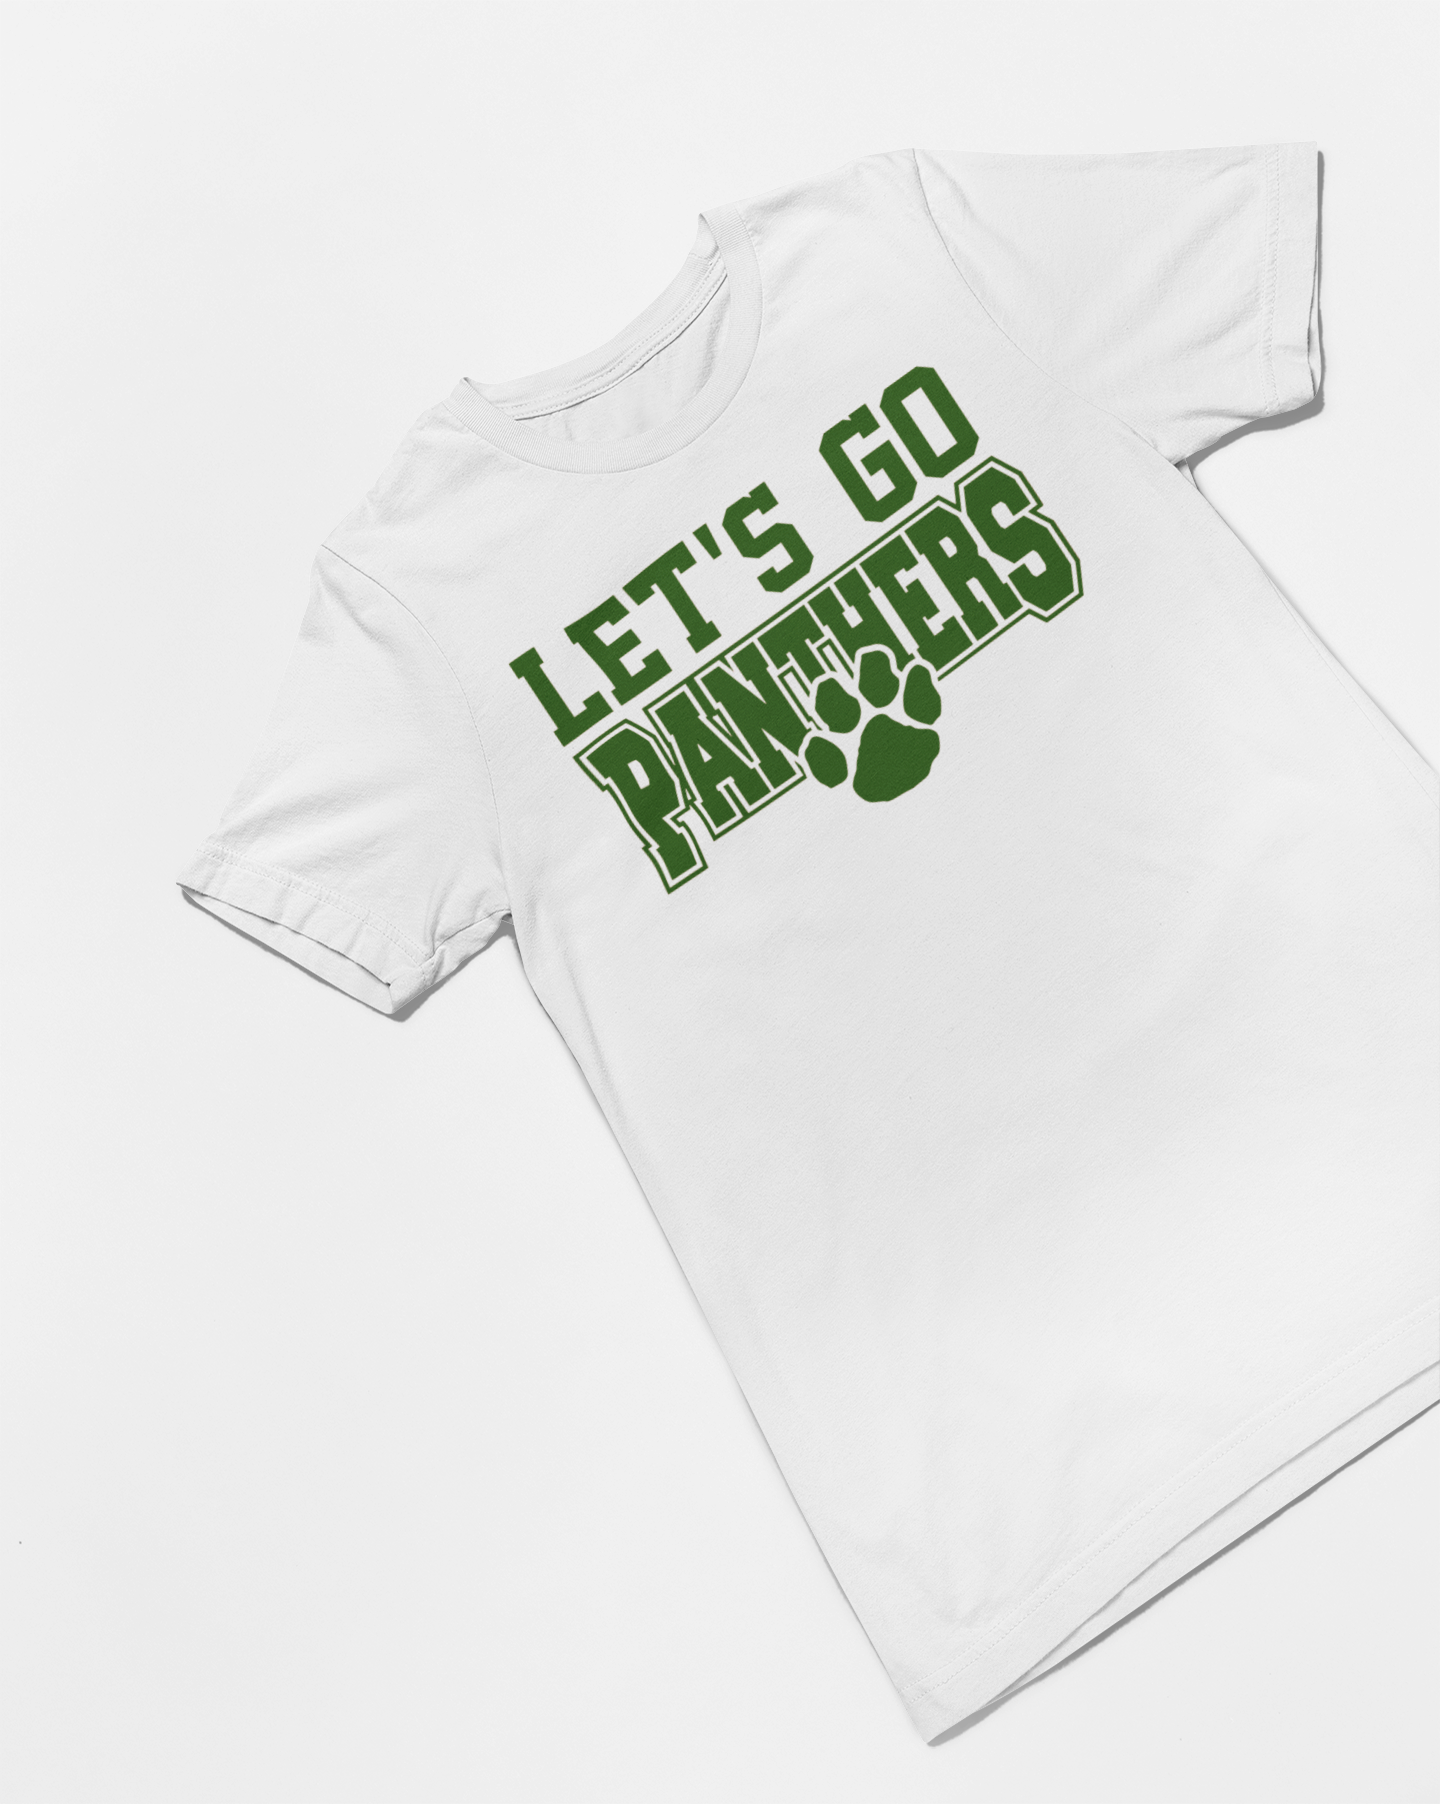 Let's Go (Your Team Here) T-shirt